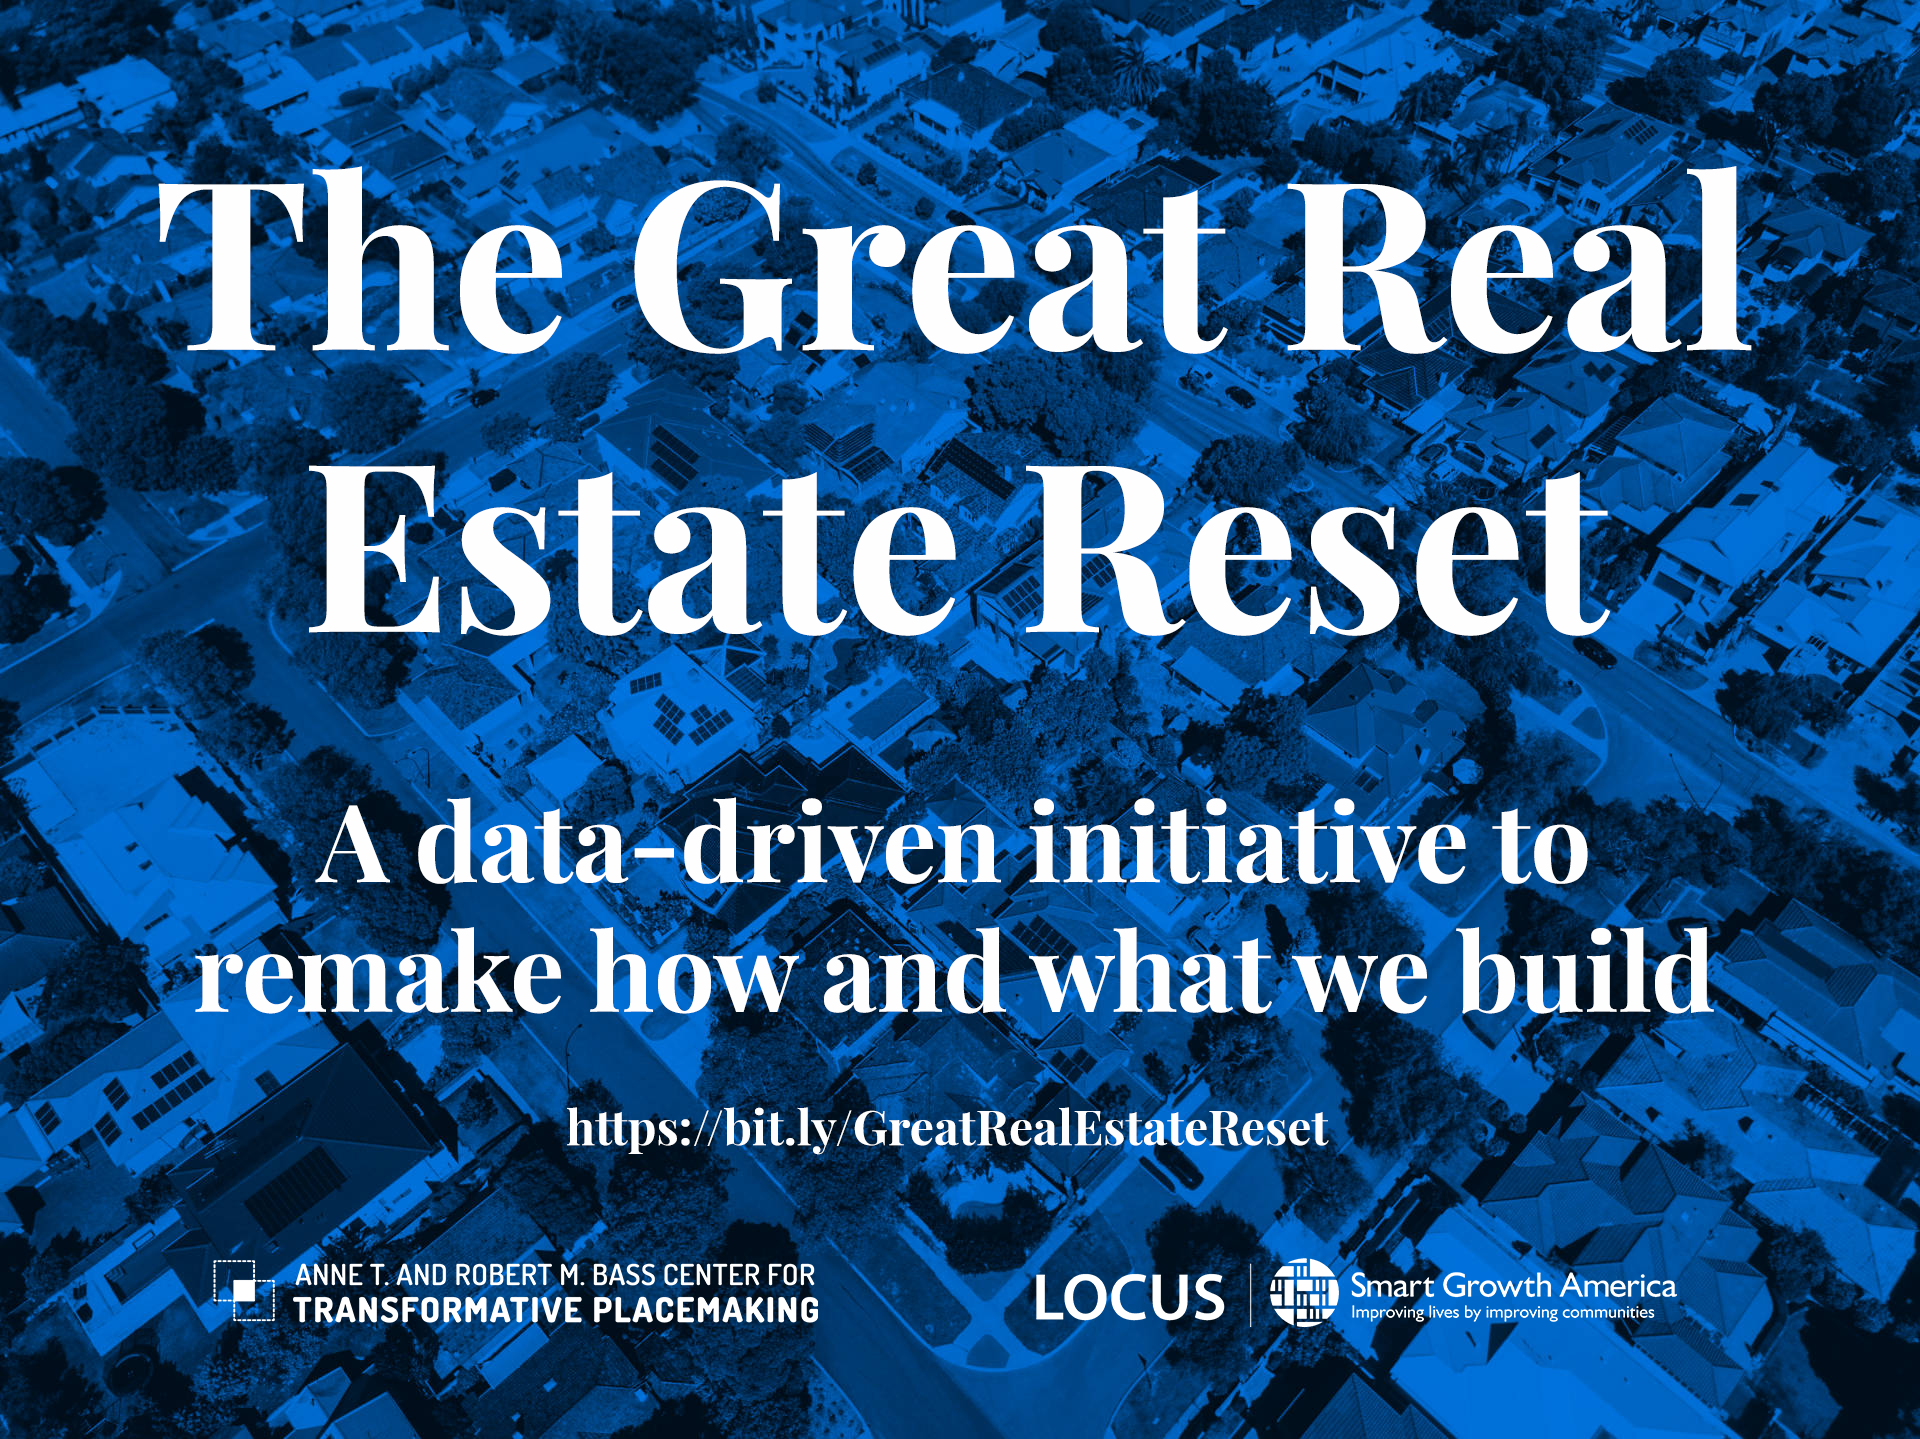 The Great Real Estate Reset